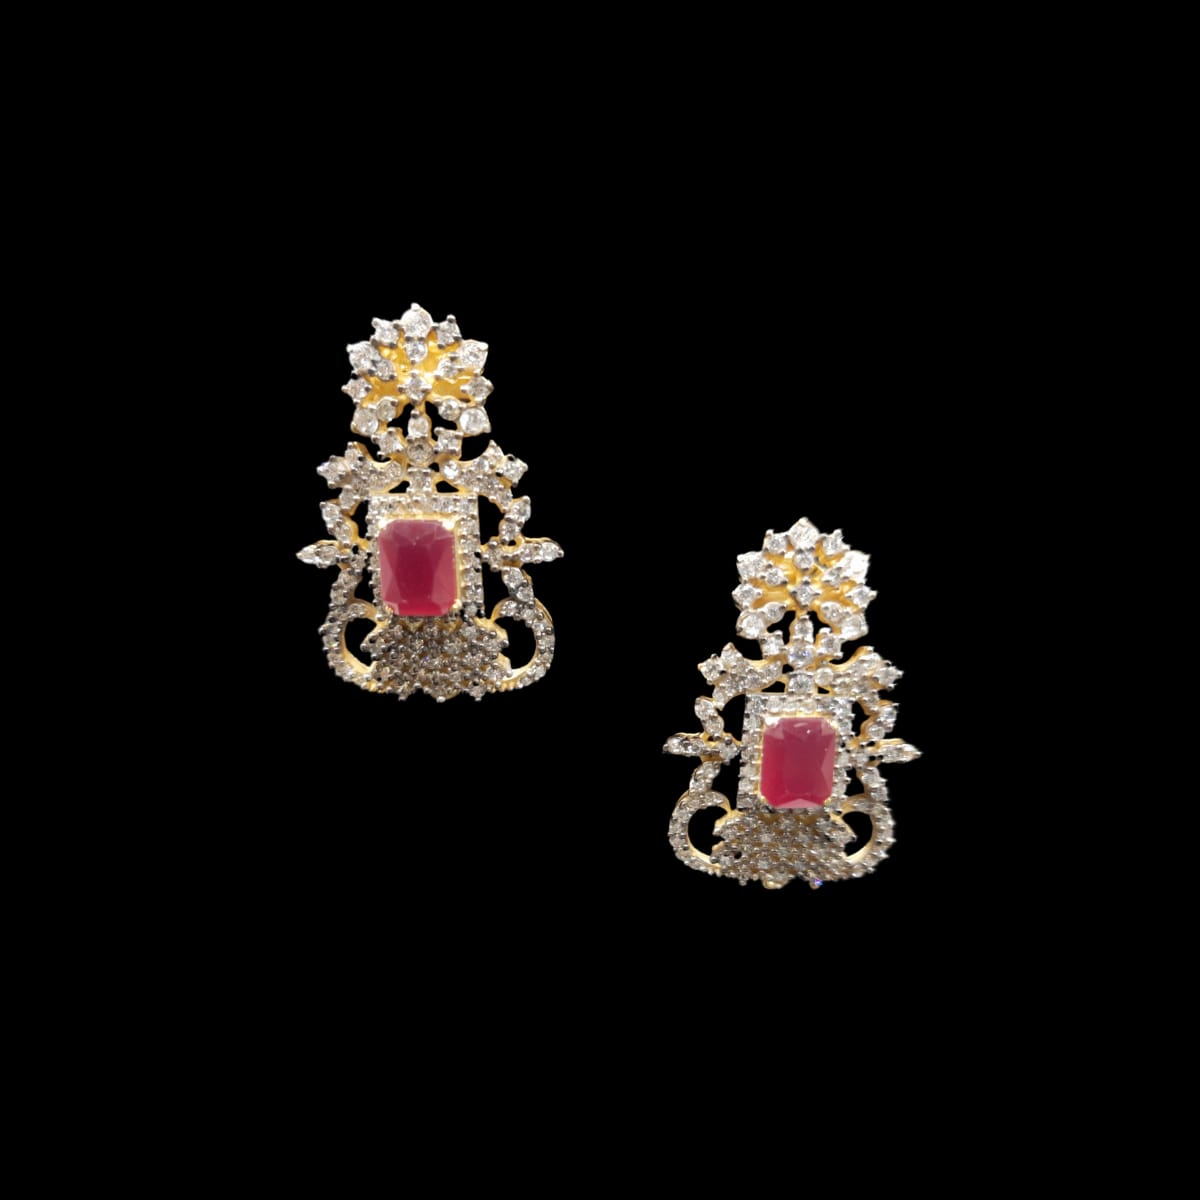 Express Yourself With Our Gemstone Earrings